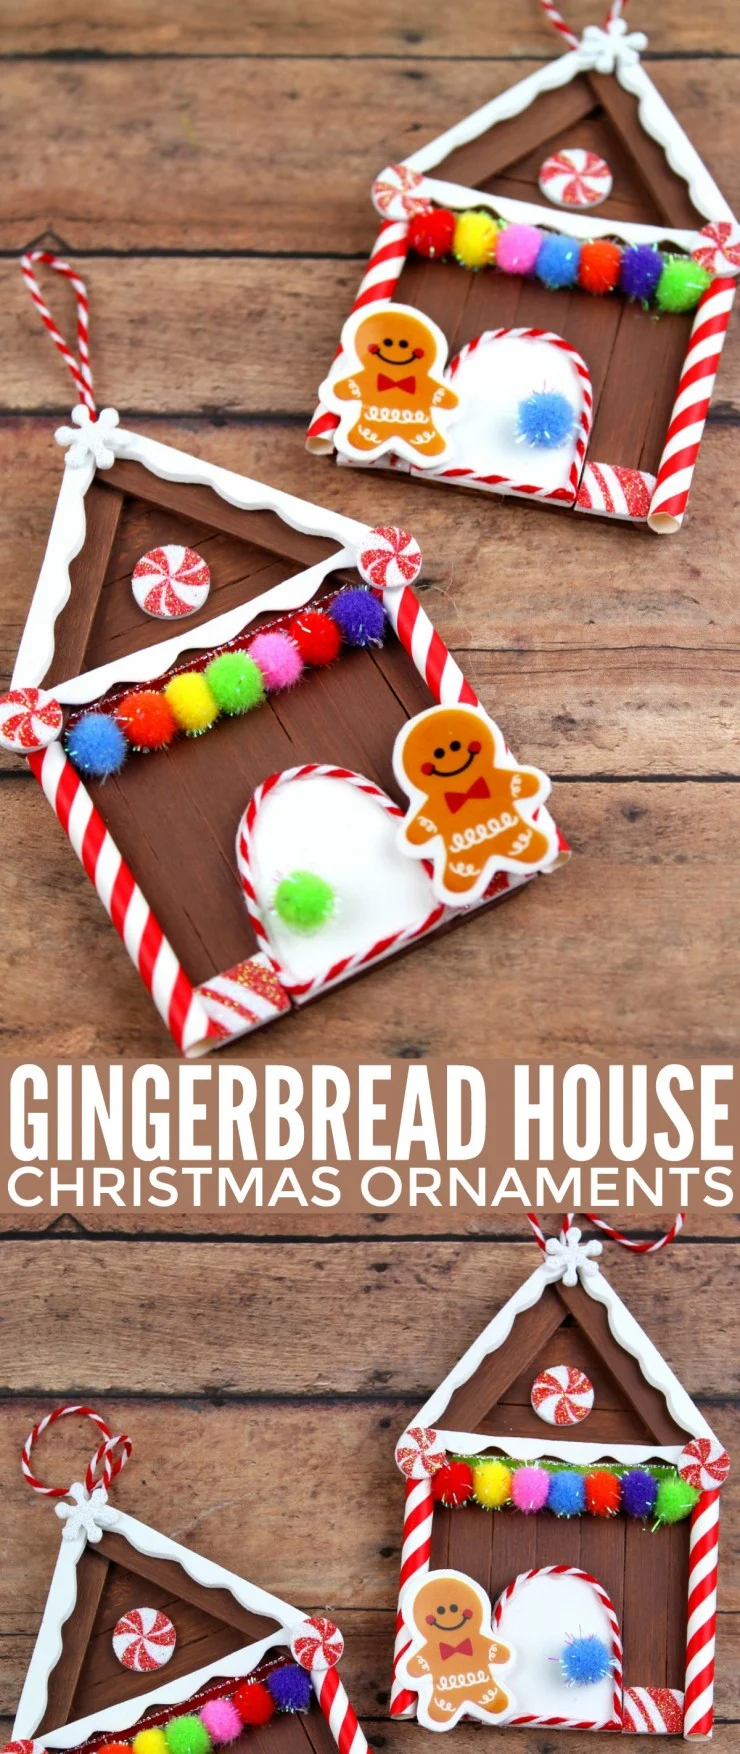 These Popsicle Stick Gingerbread House Christmas Ornaments are an adorable and festive holiday craft that make for great keepsake gifts that look great on a Christmas tree. We had so much fun making these Christmas ornaments!